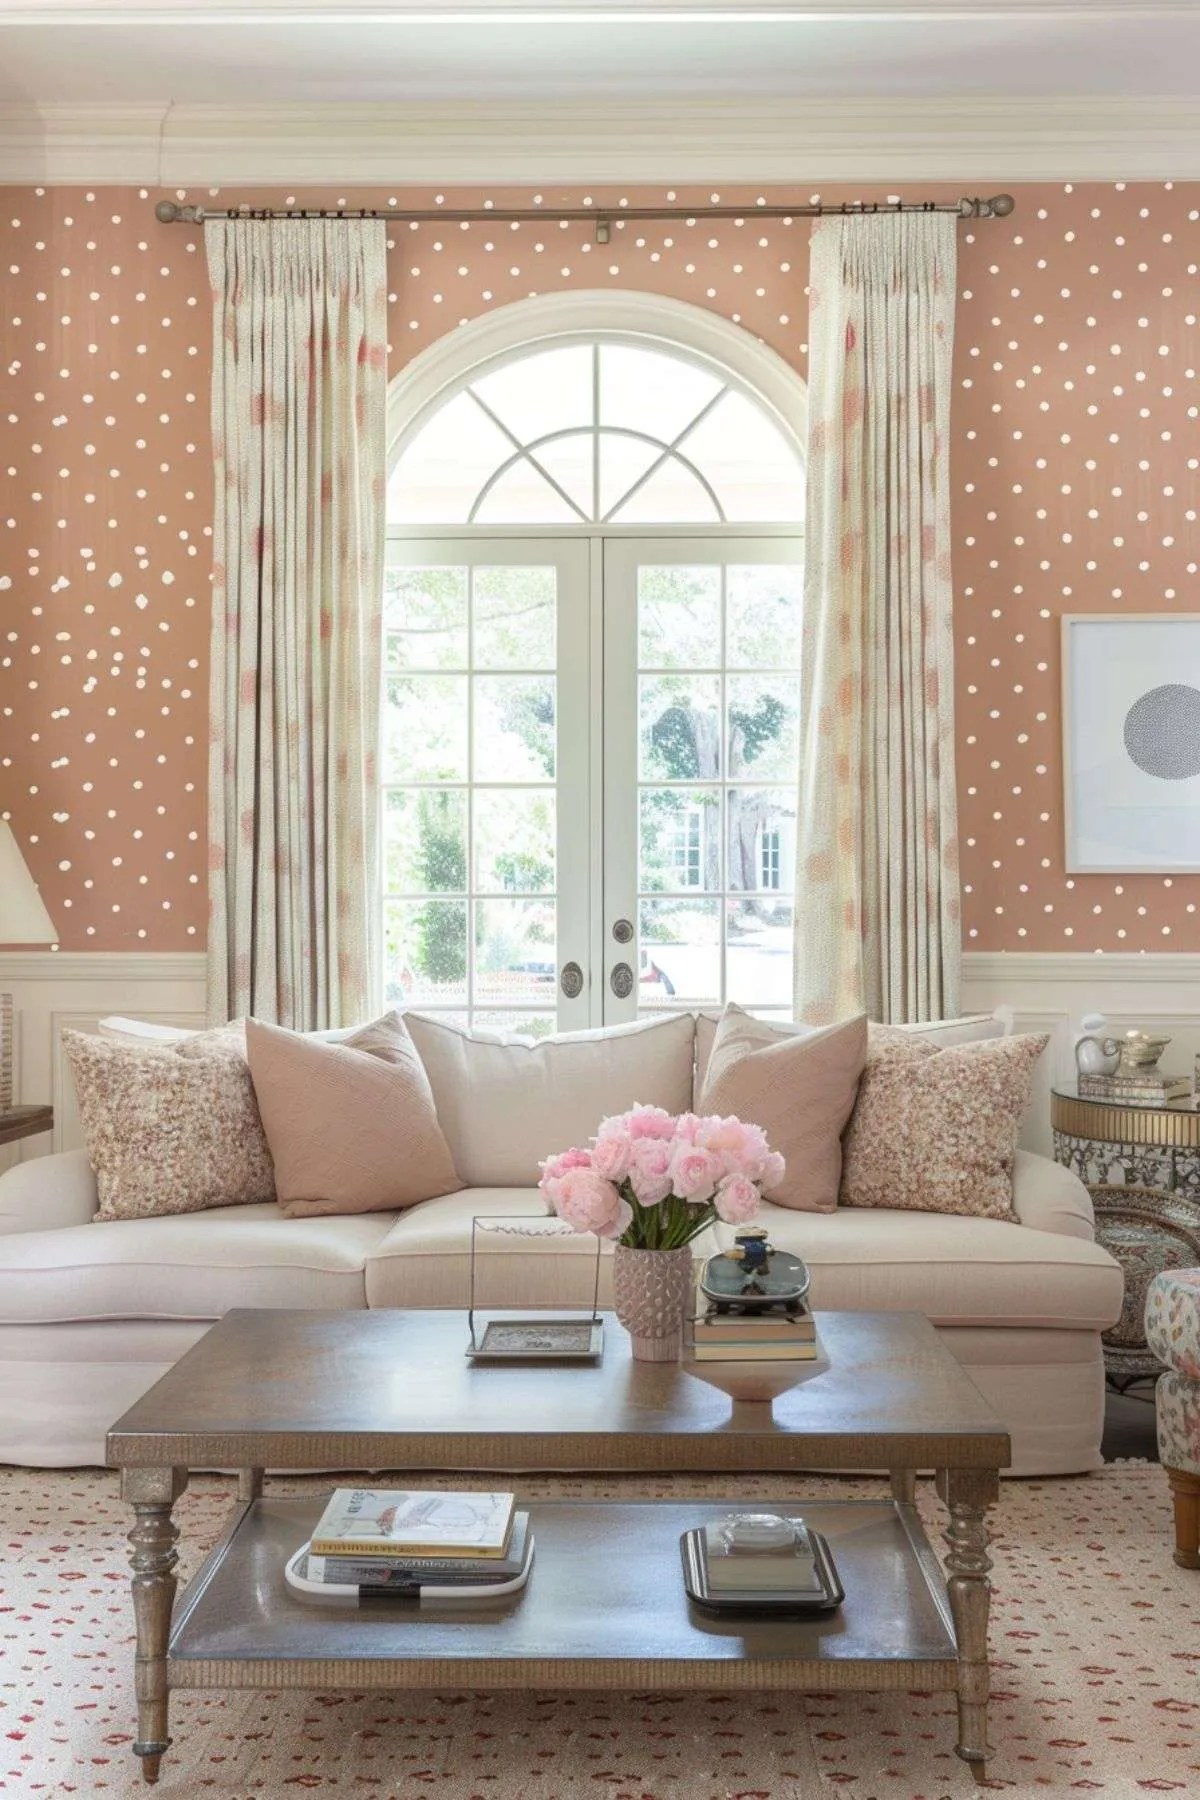 Polka Dots Are Back: How to Incorporate This Classic Pattern into Modern Decor